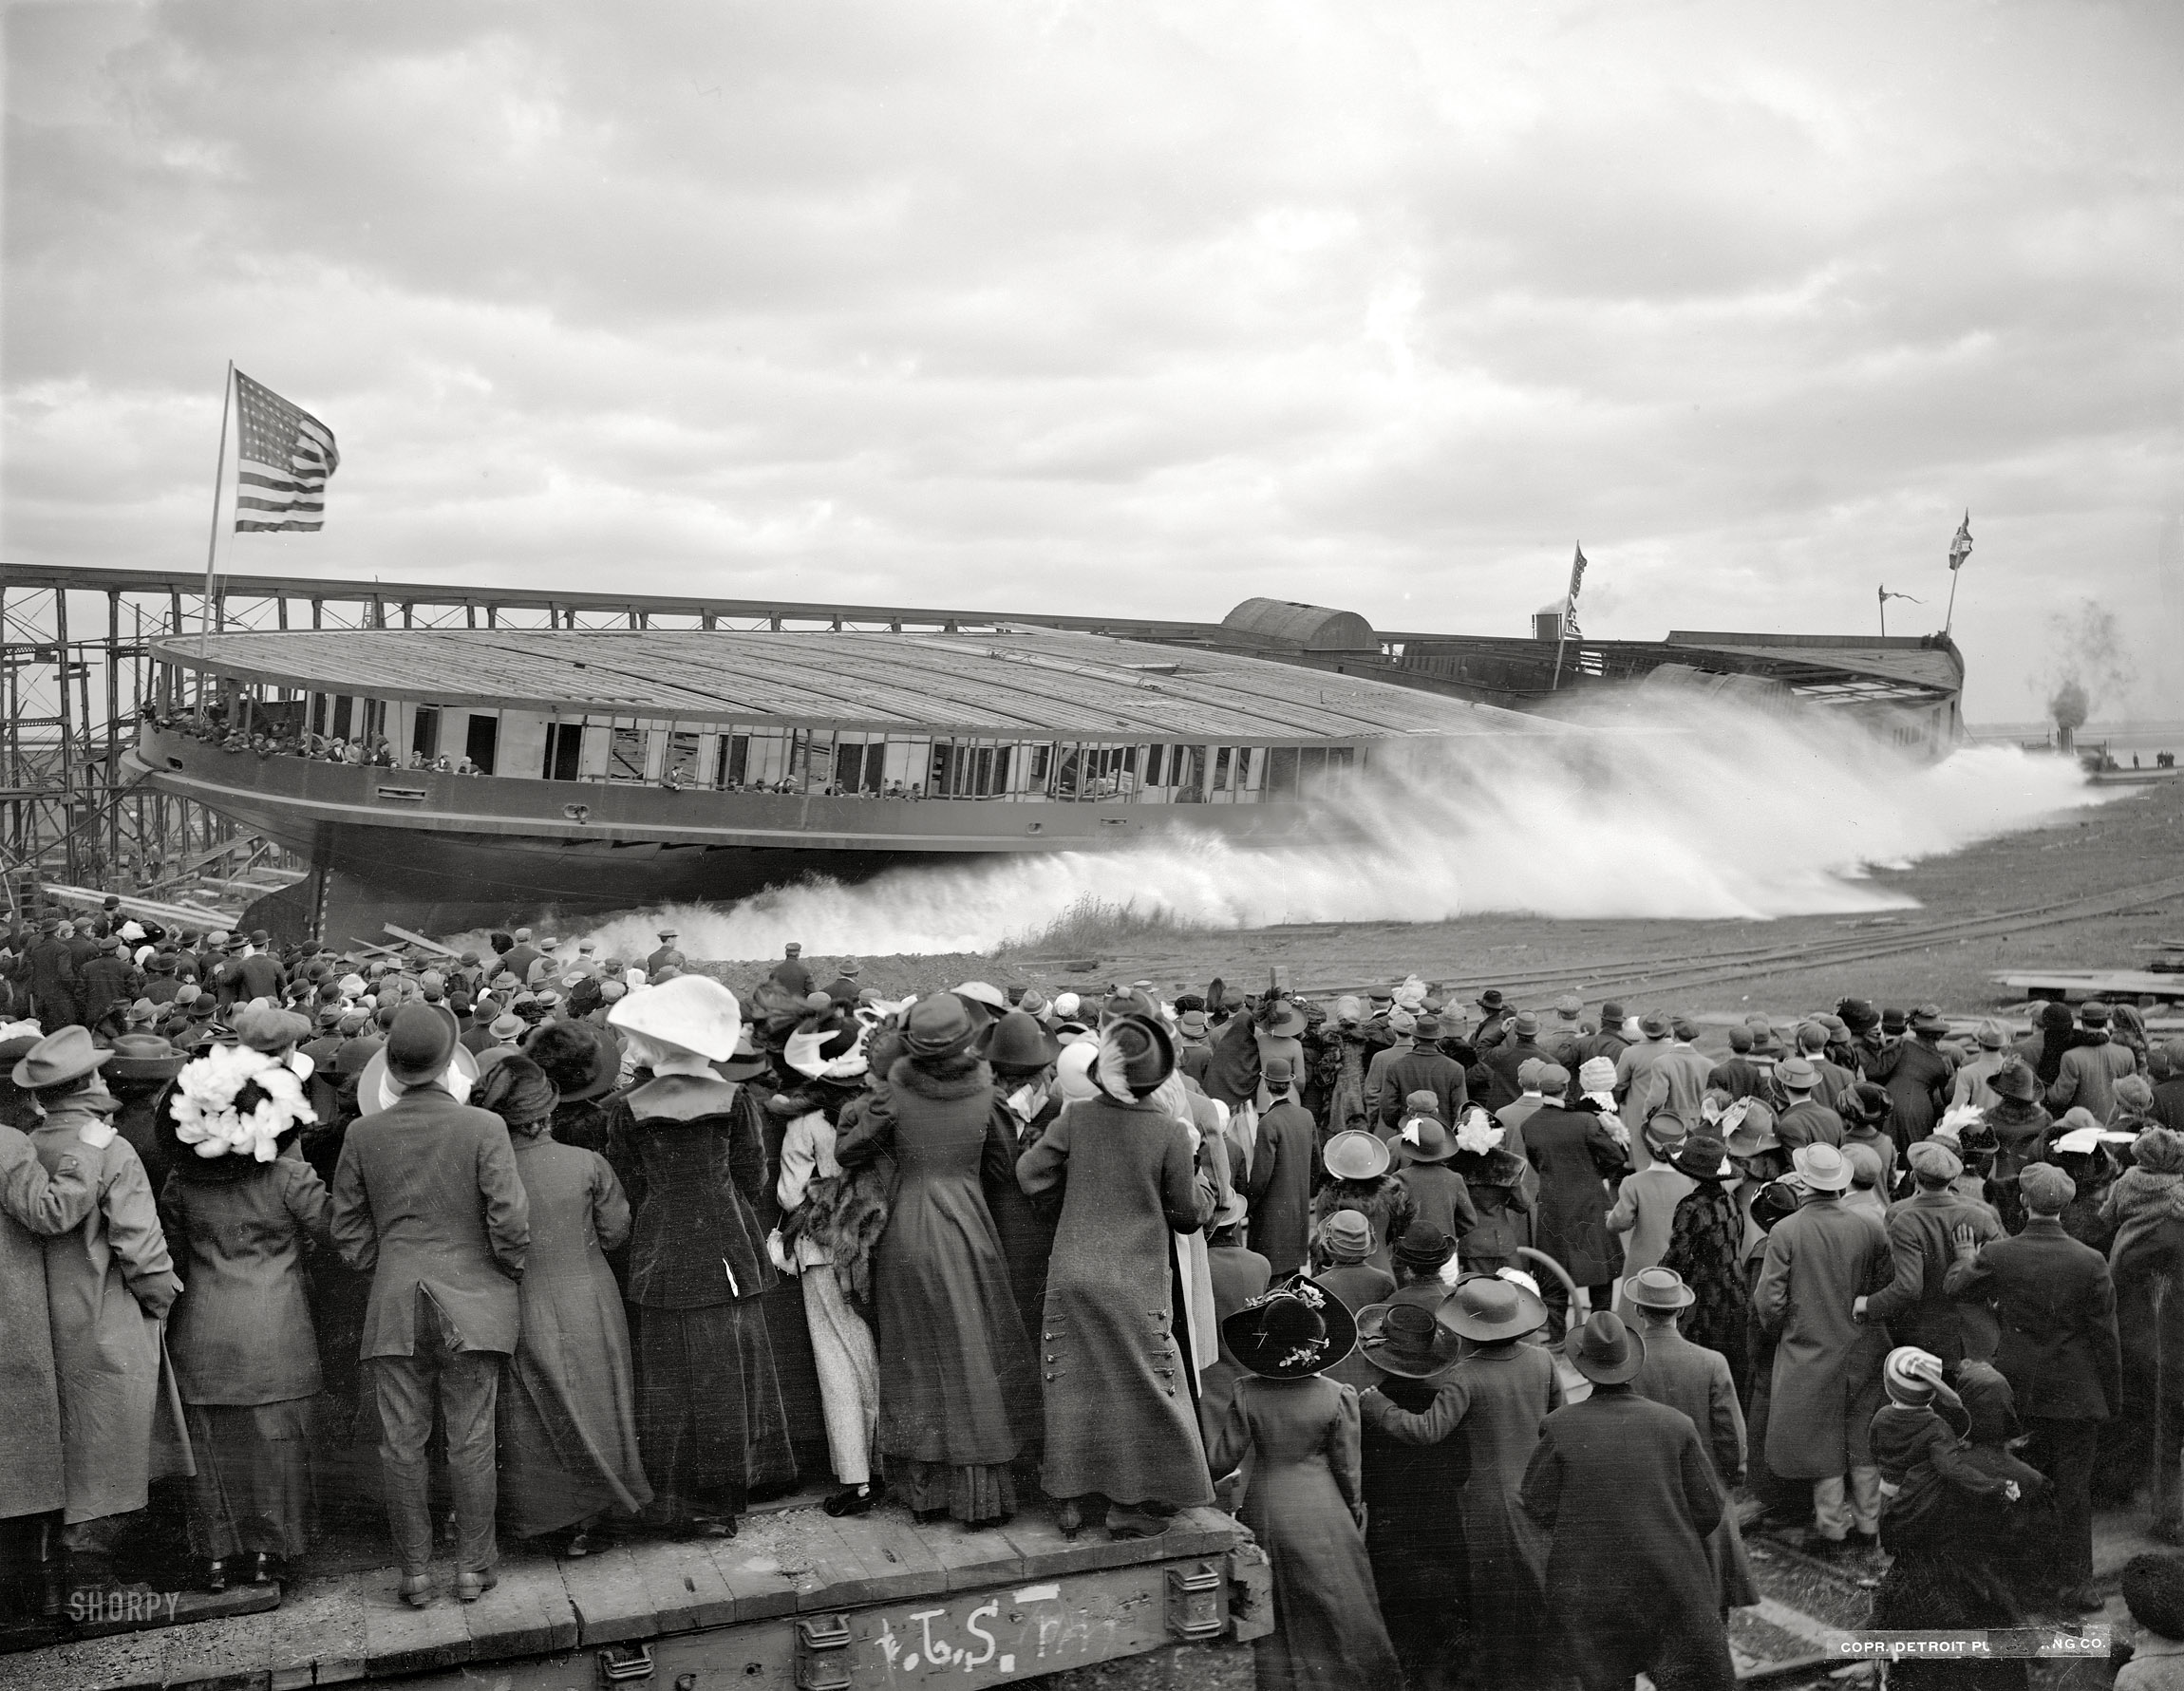 November 9, 1912. Wyandotte, Michigan. "Steamer Seeandbee, the launch." Thrilling denouement of the scene glimpsed earlier here. 8x10 inch dry plate glass negative, Detroit Publishing Company. View full size.